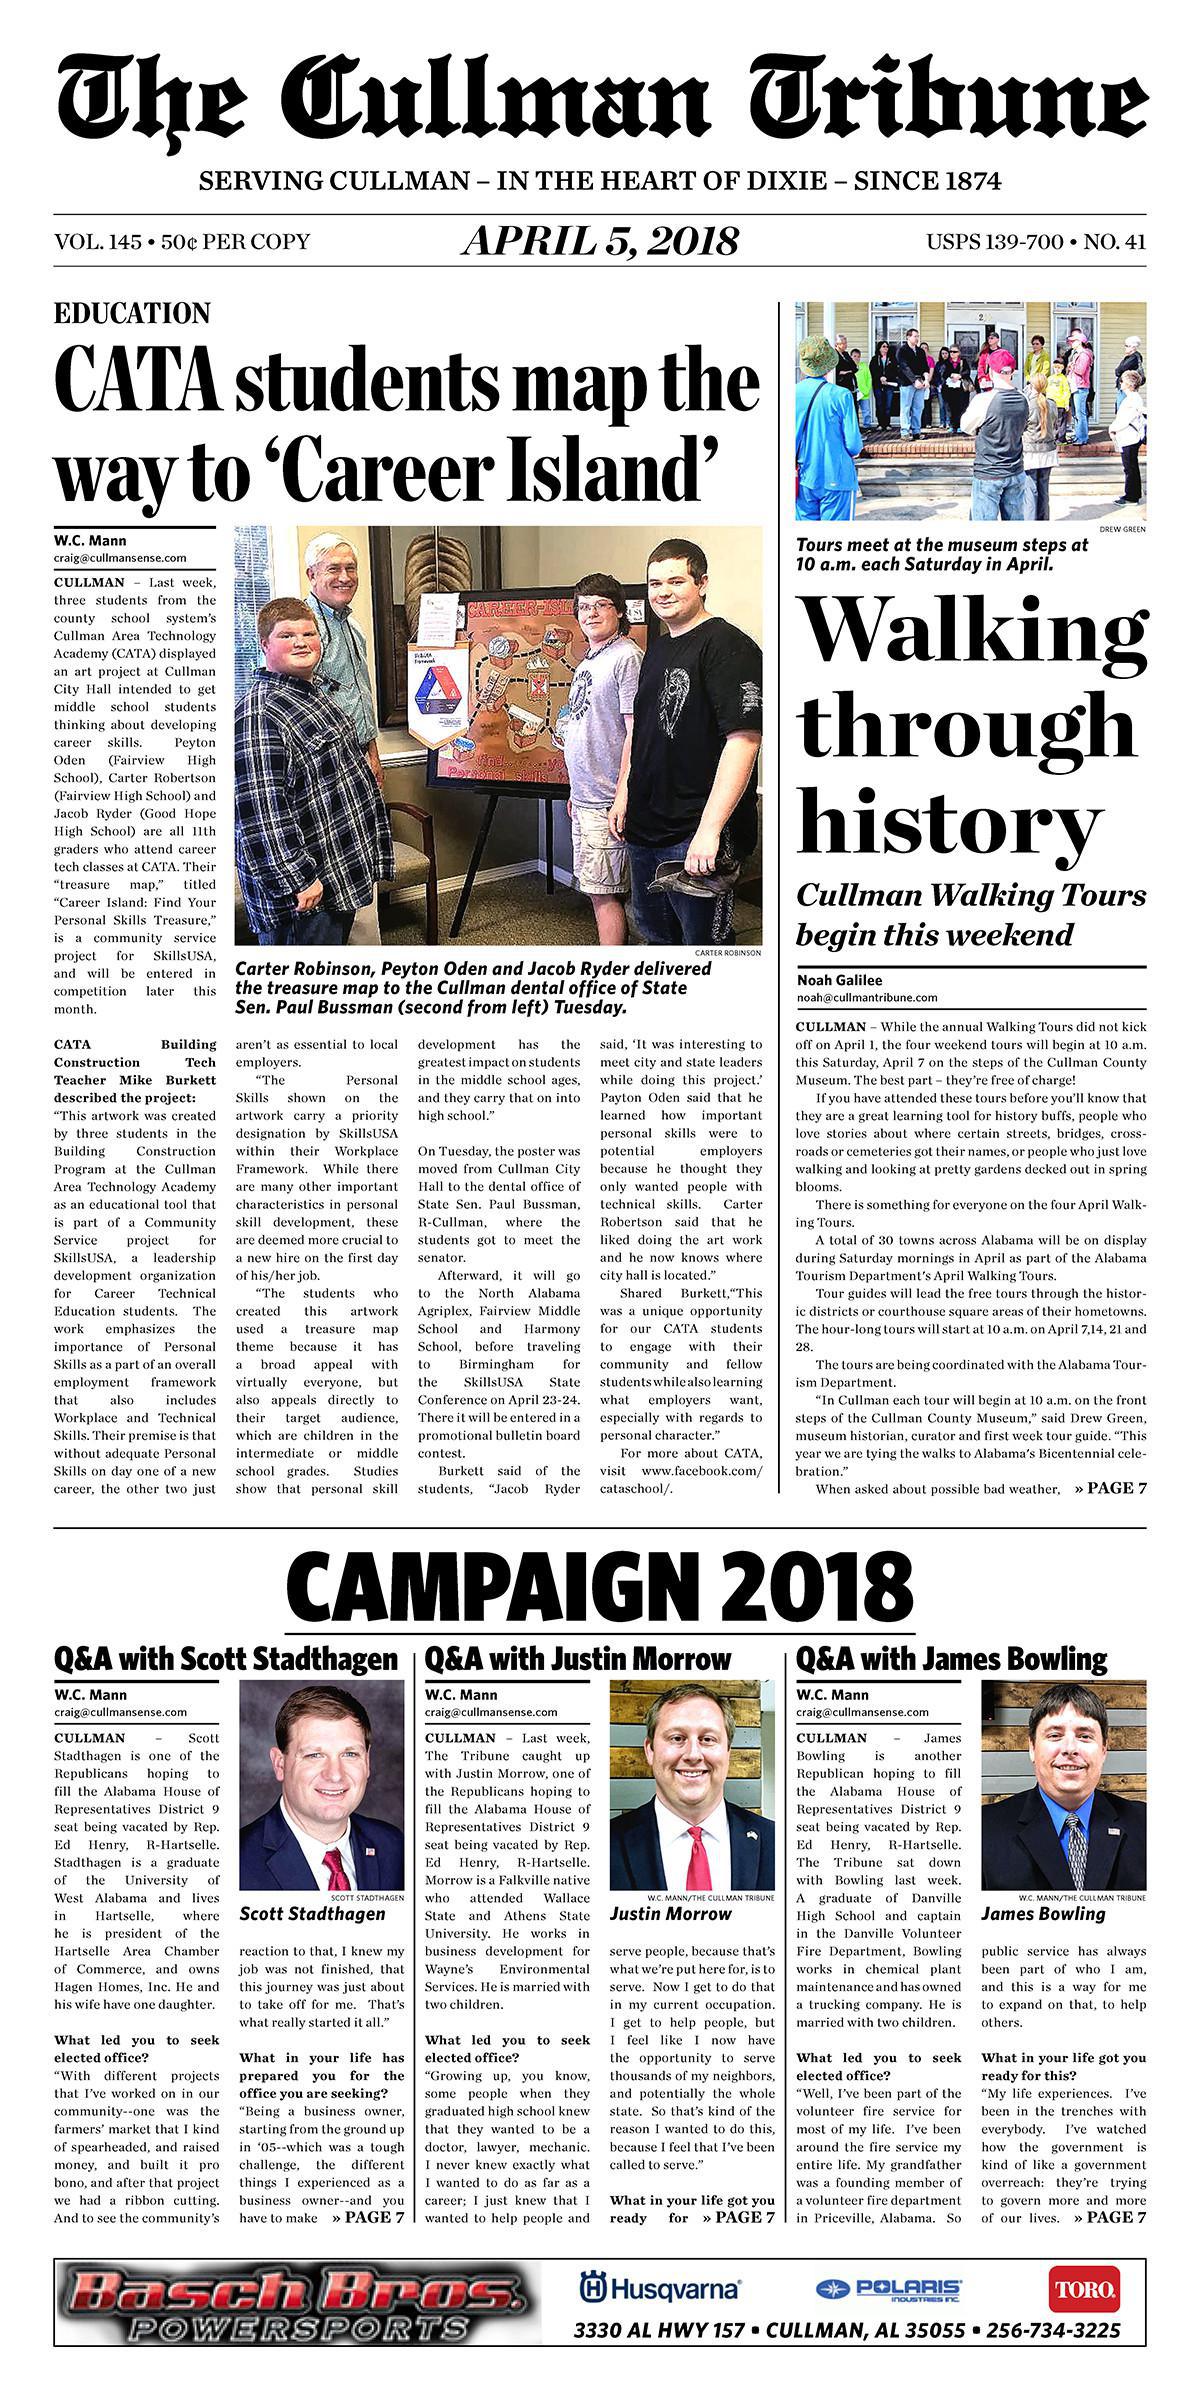 Good Morning Cullman! The 04-05-2018 edition of the Cullman Tribune is now ready to view